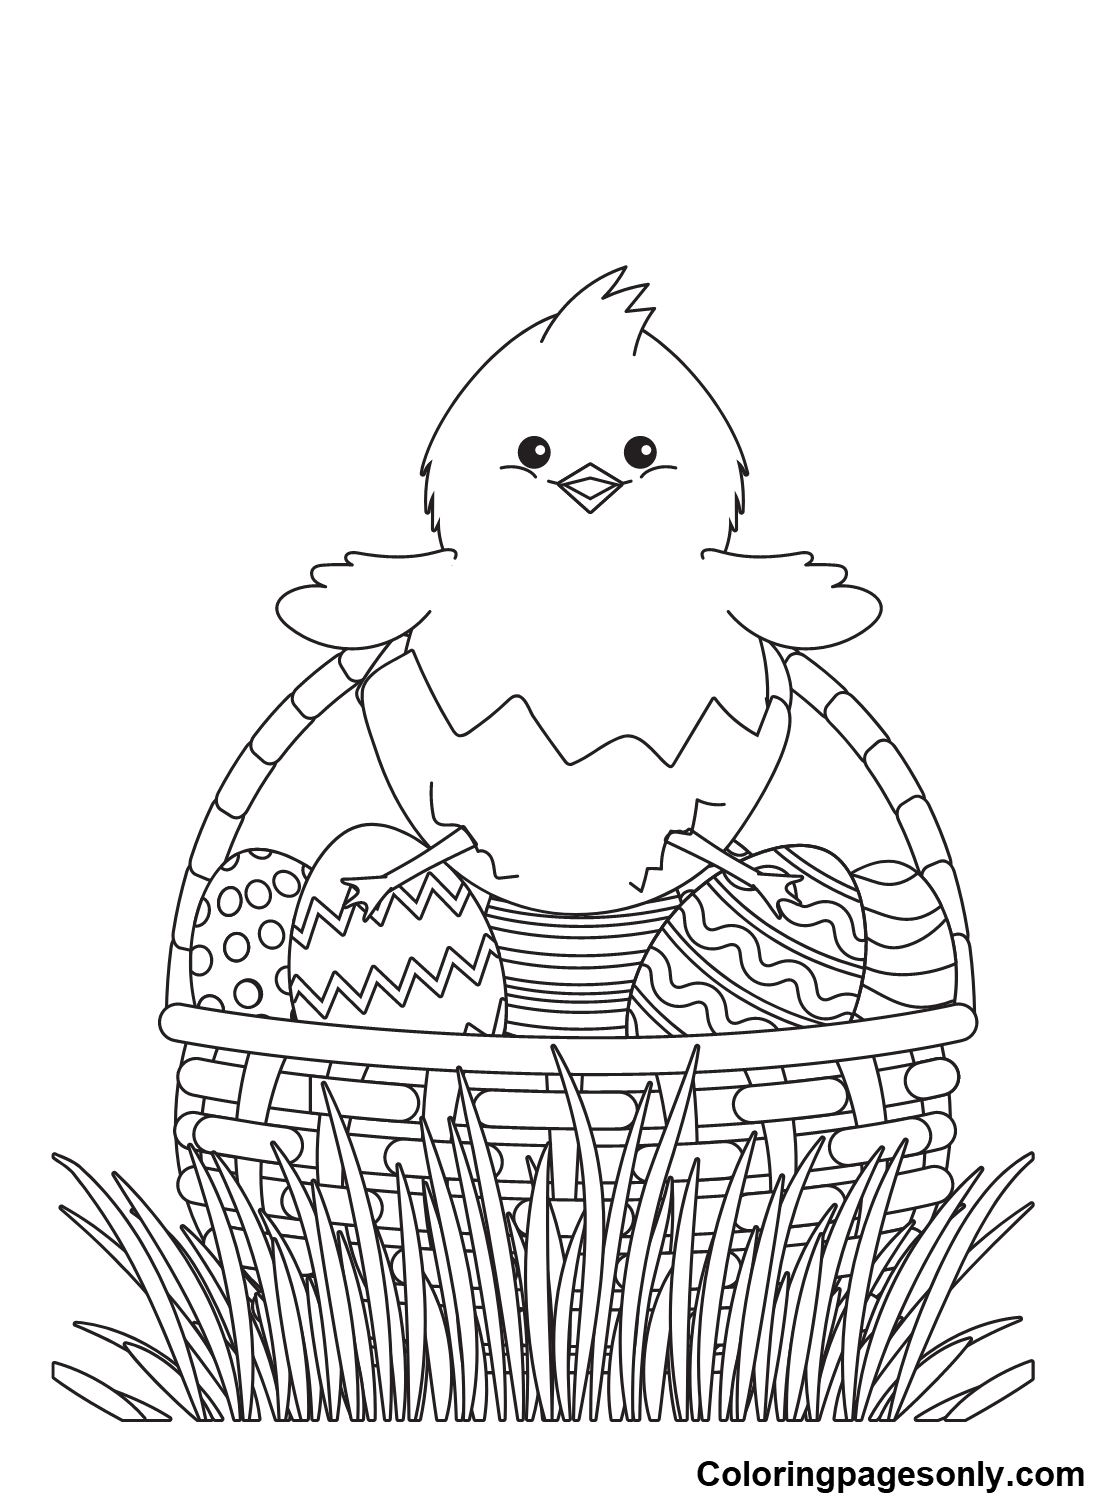 Easter Chick and Easter Basket Coloring Page